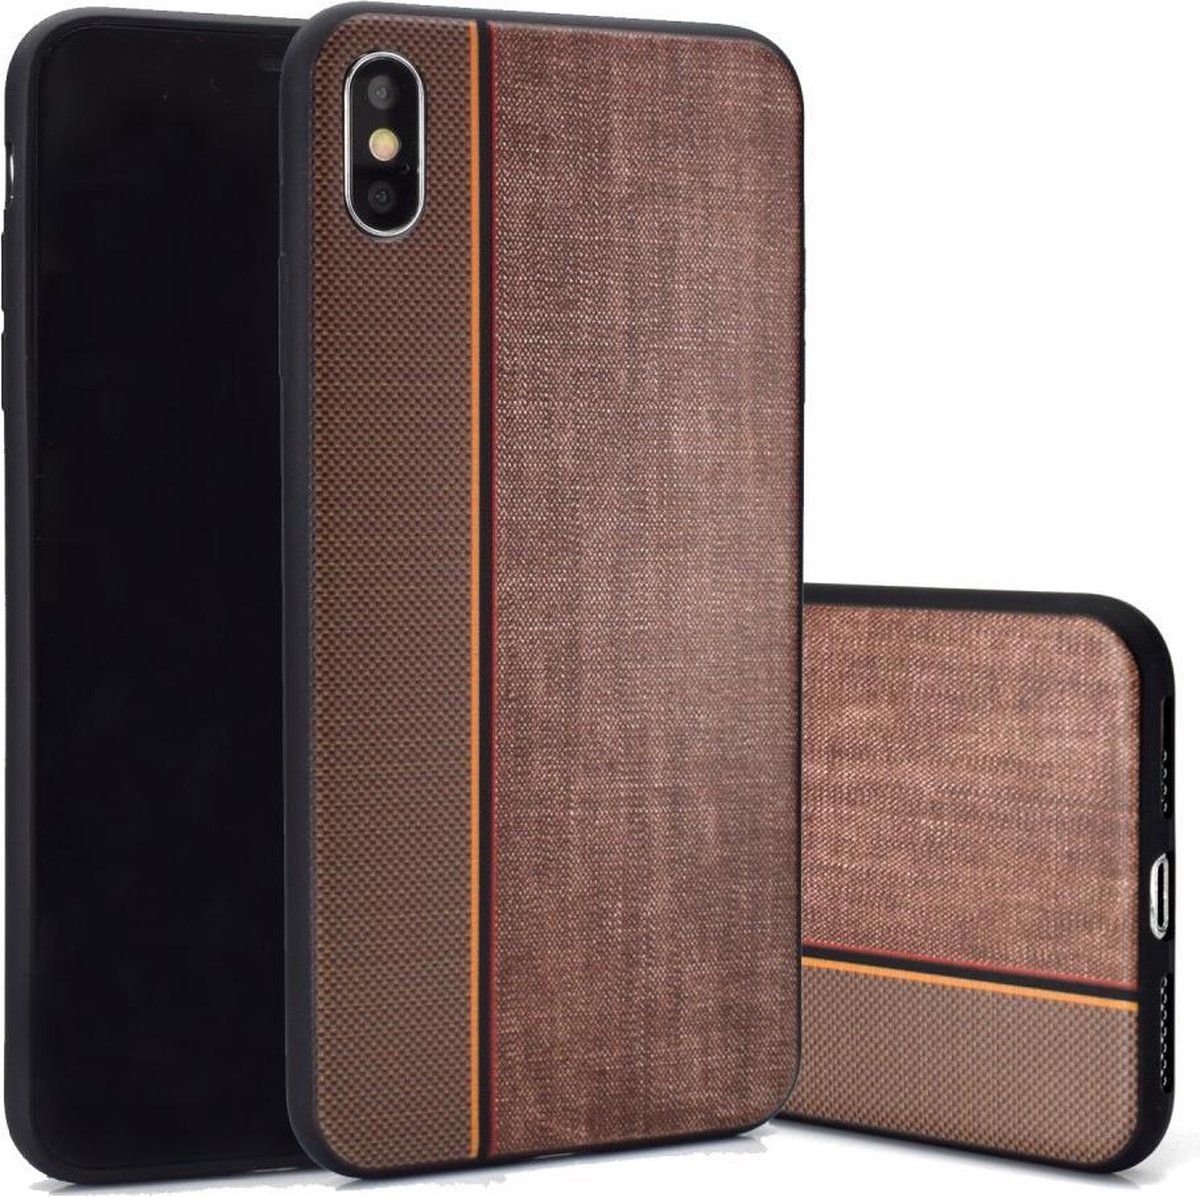 TPU Backcover - iPhone X/Xs - Jeansstof Print - Bruin/Koffie